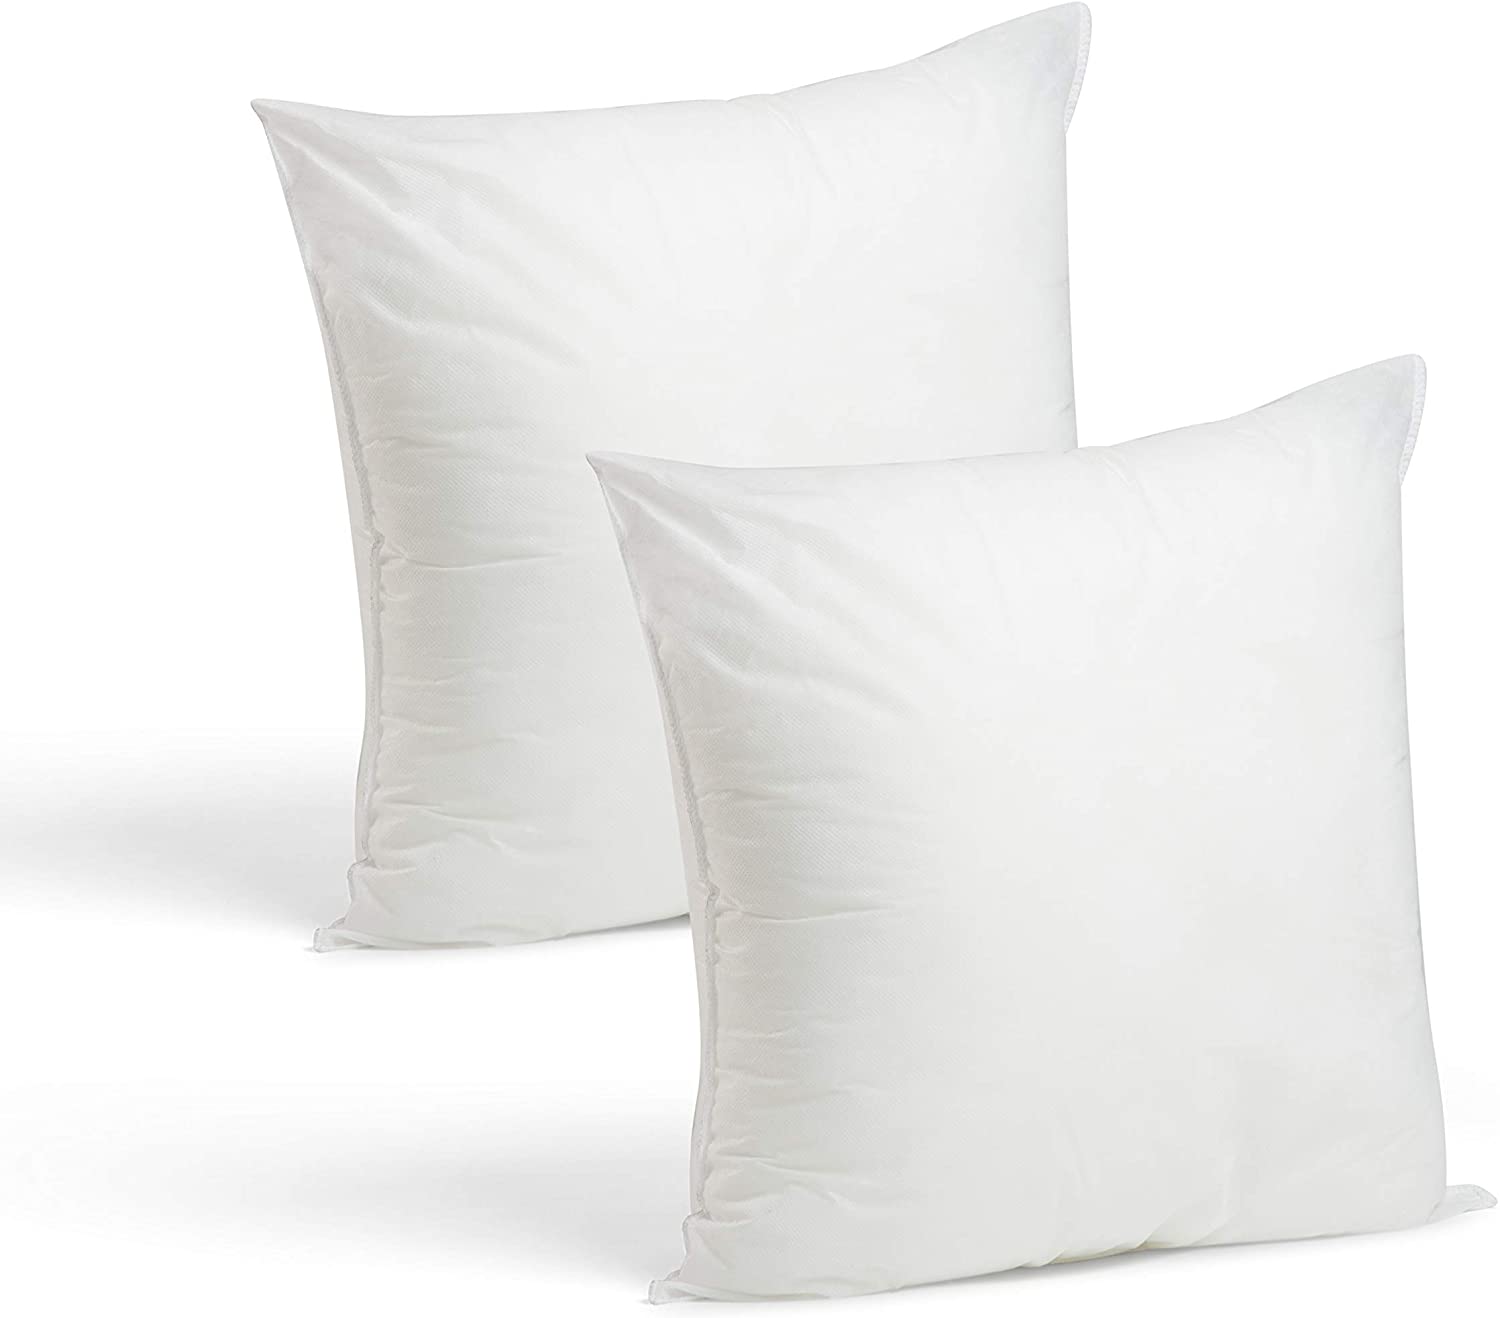 Foamily Firm Hypoallergenic Throw Pillow Inserts, 2-Pack